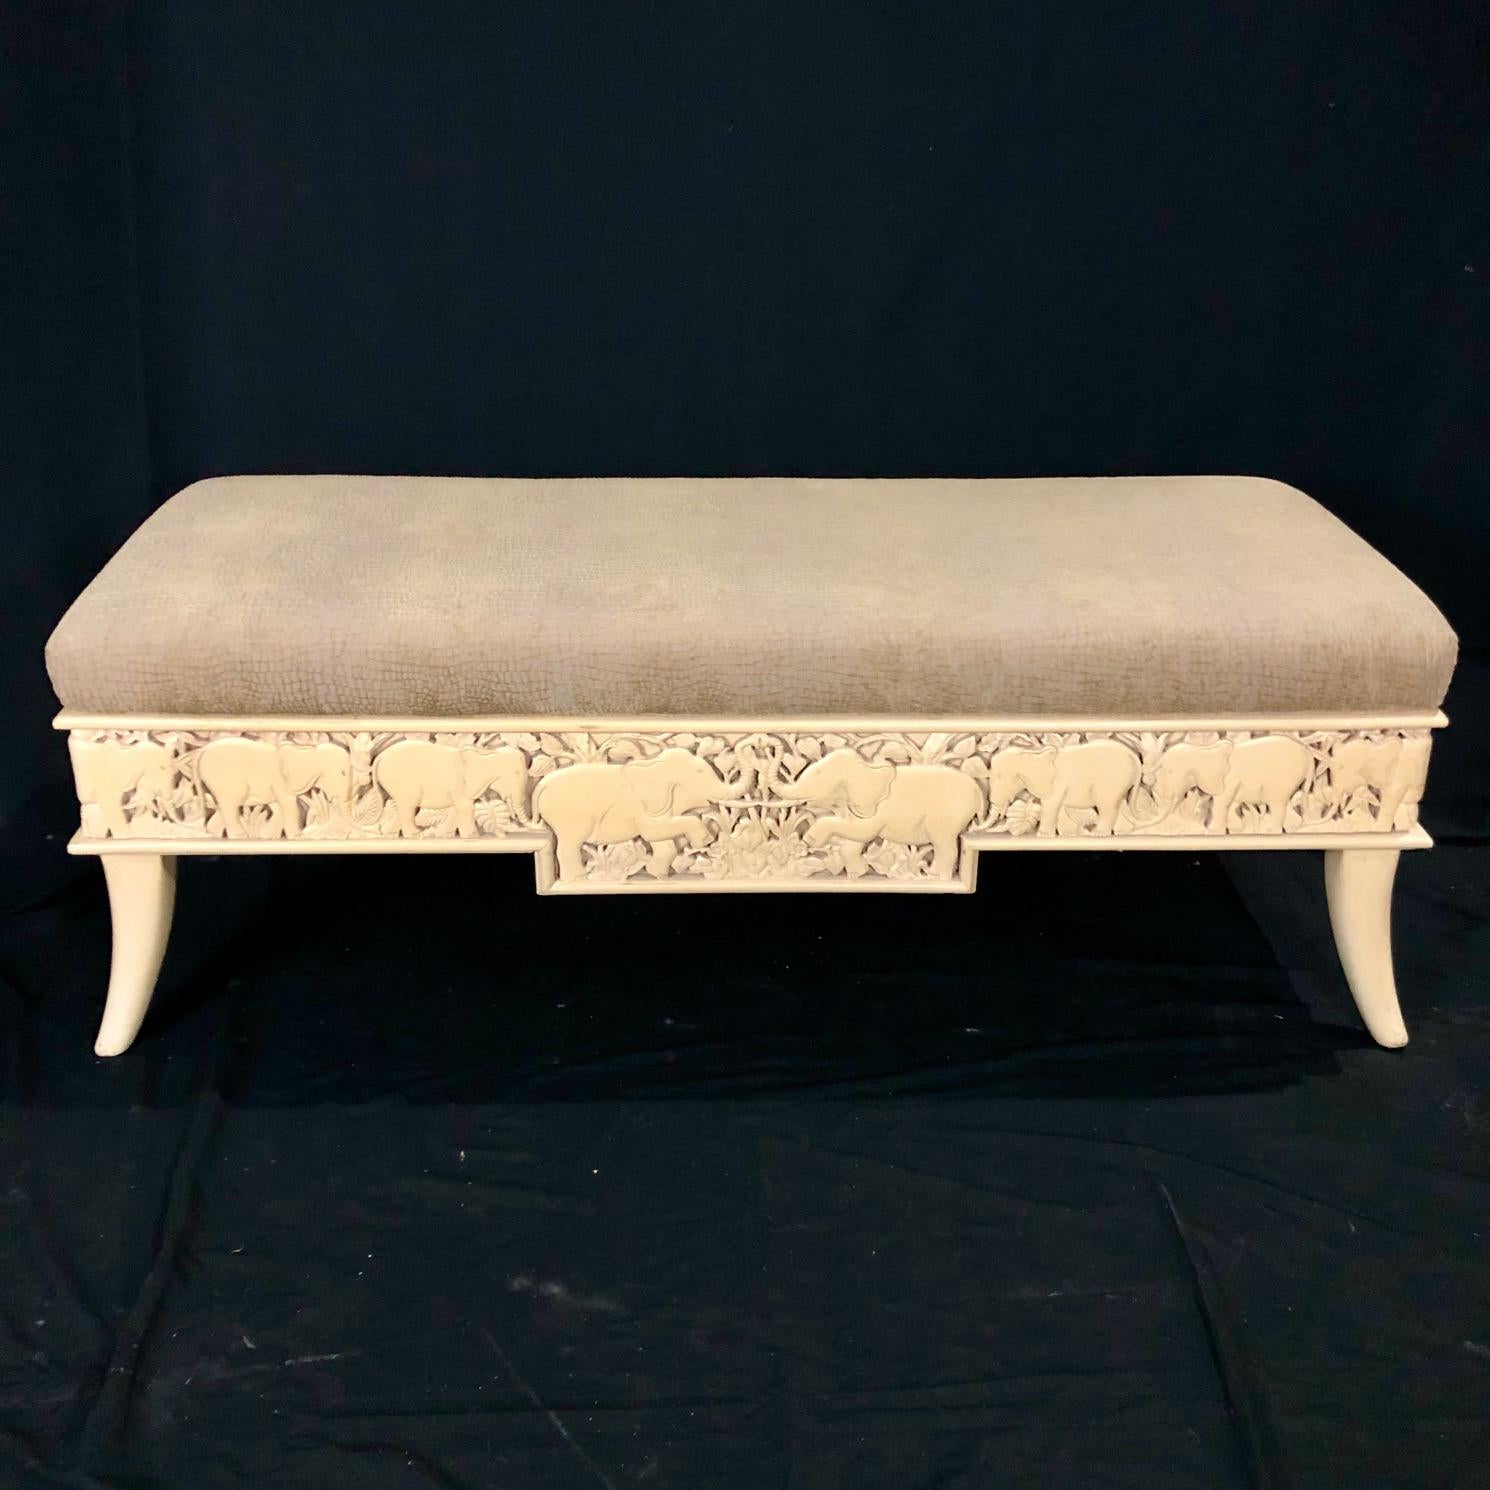 Beautifully carved wood bench by Sam Moore Furniture Company depicting elephants and foliage with a patterned top cushion that is reminiscent of an animal print. The cushion is plush and in very good condition (no stains or rips). Neutral colors